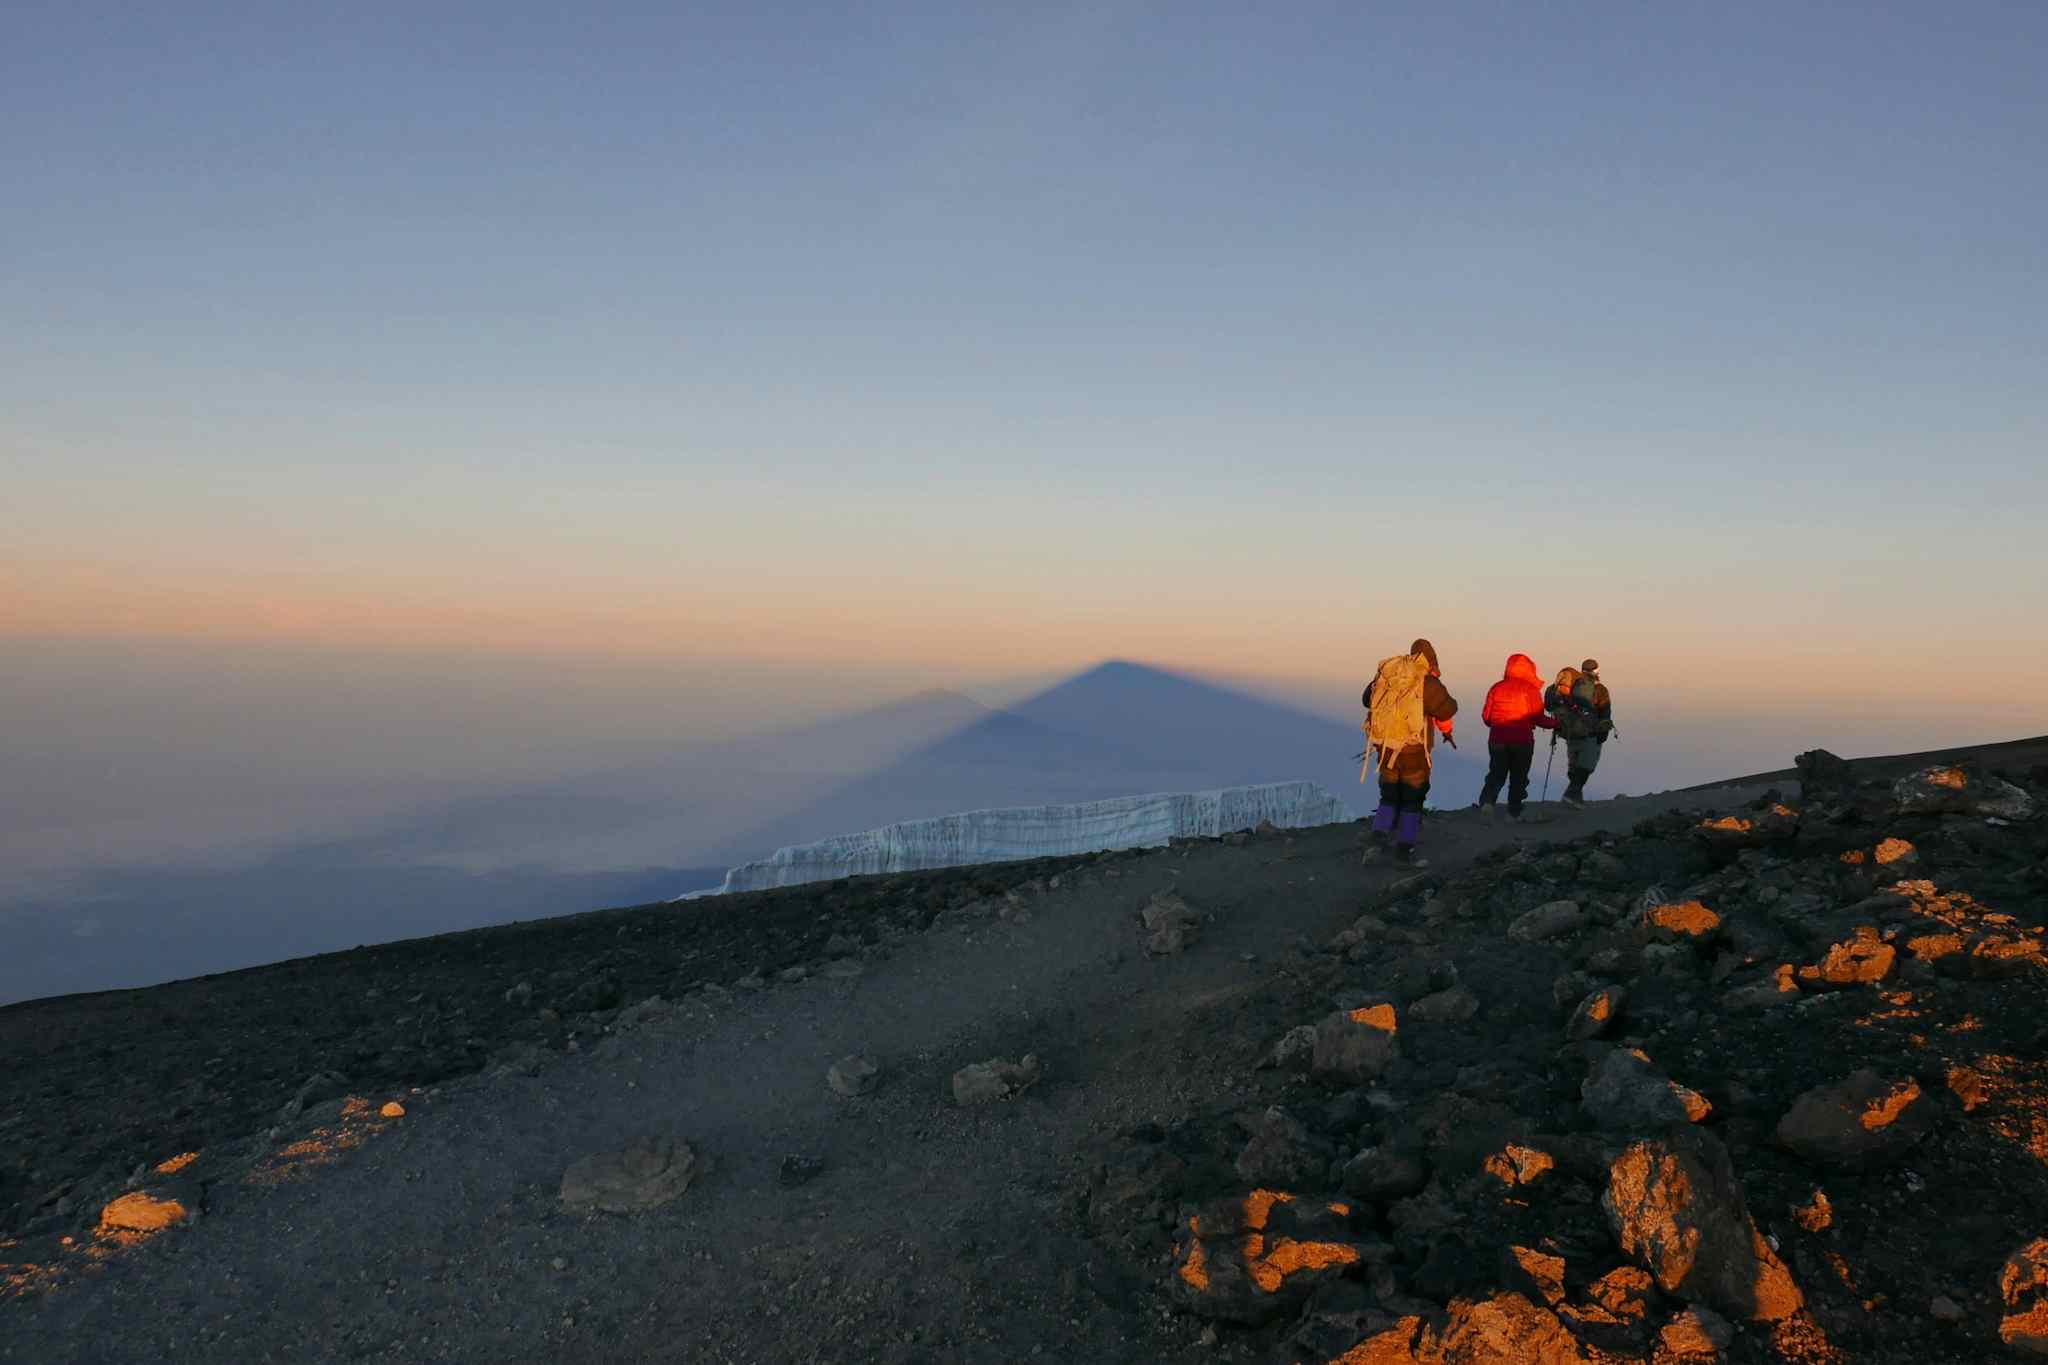 Hikers on their way to the summit of Mount Kilimanjaro at sunrise in Tanzania.